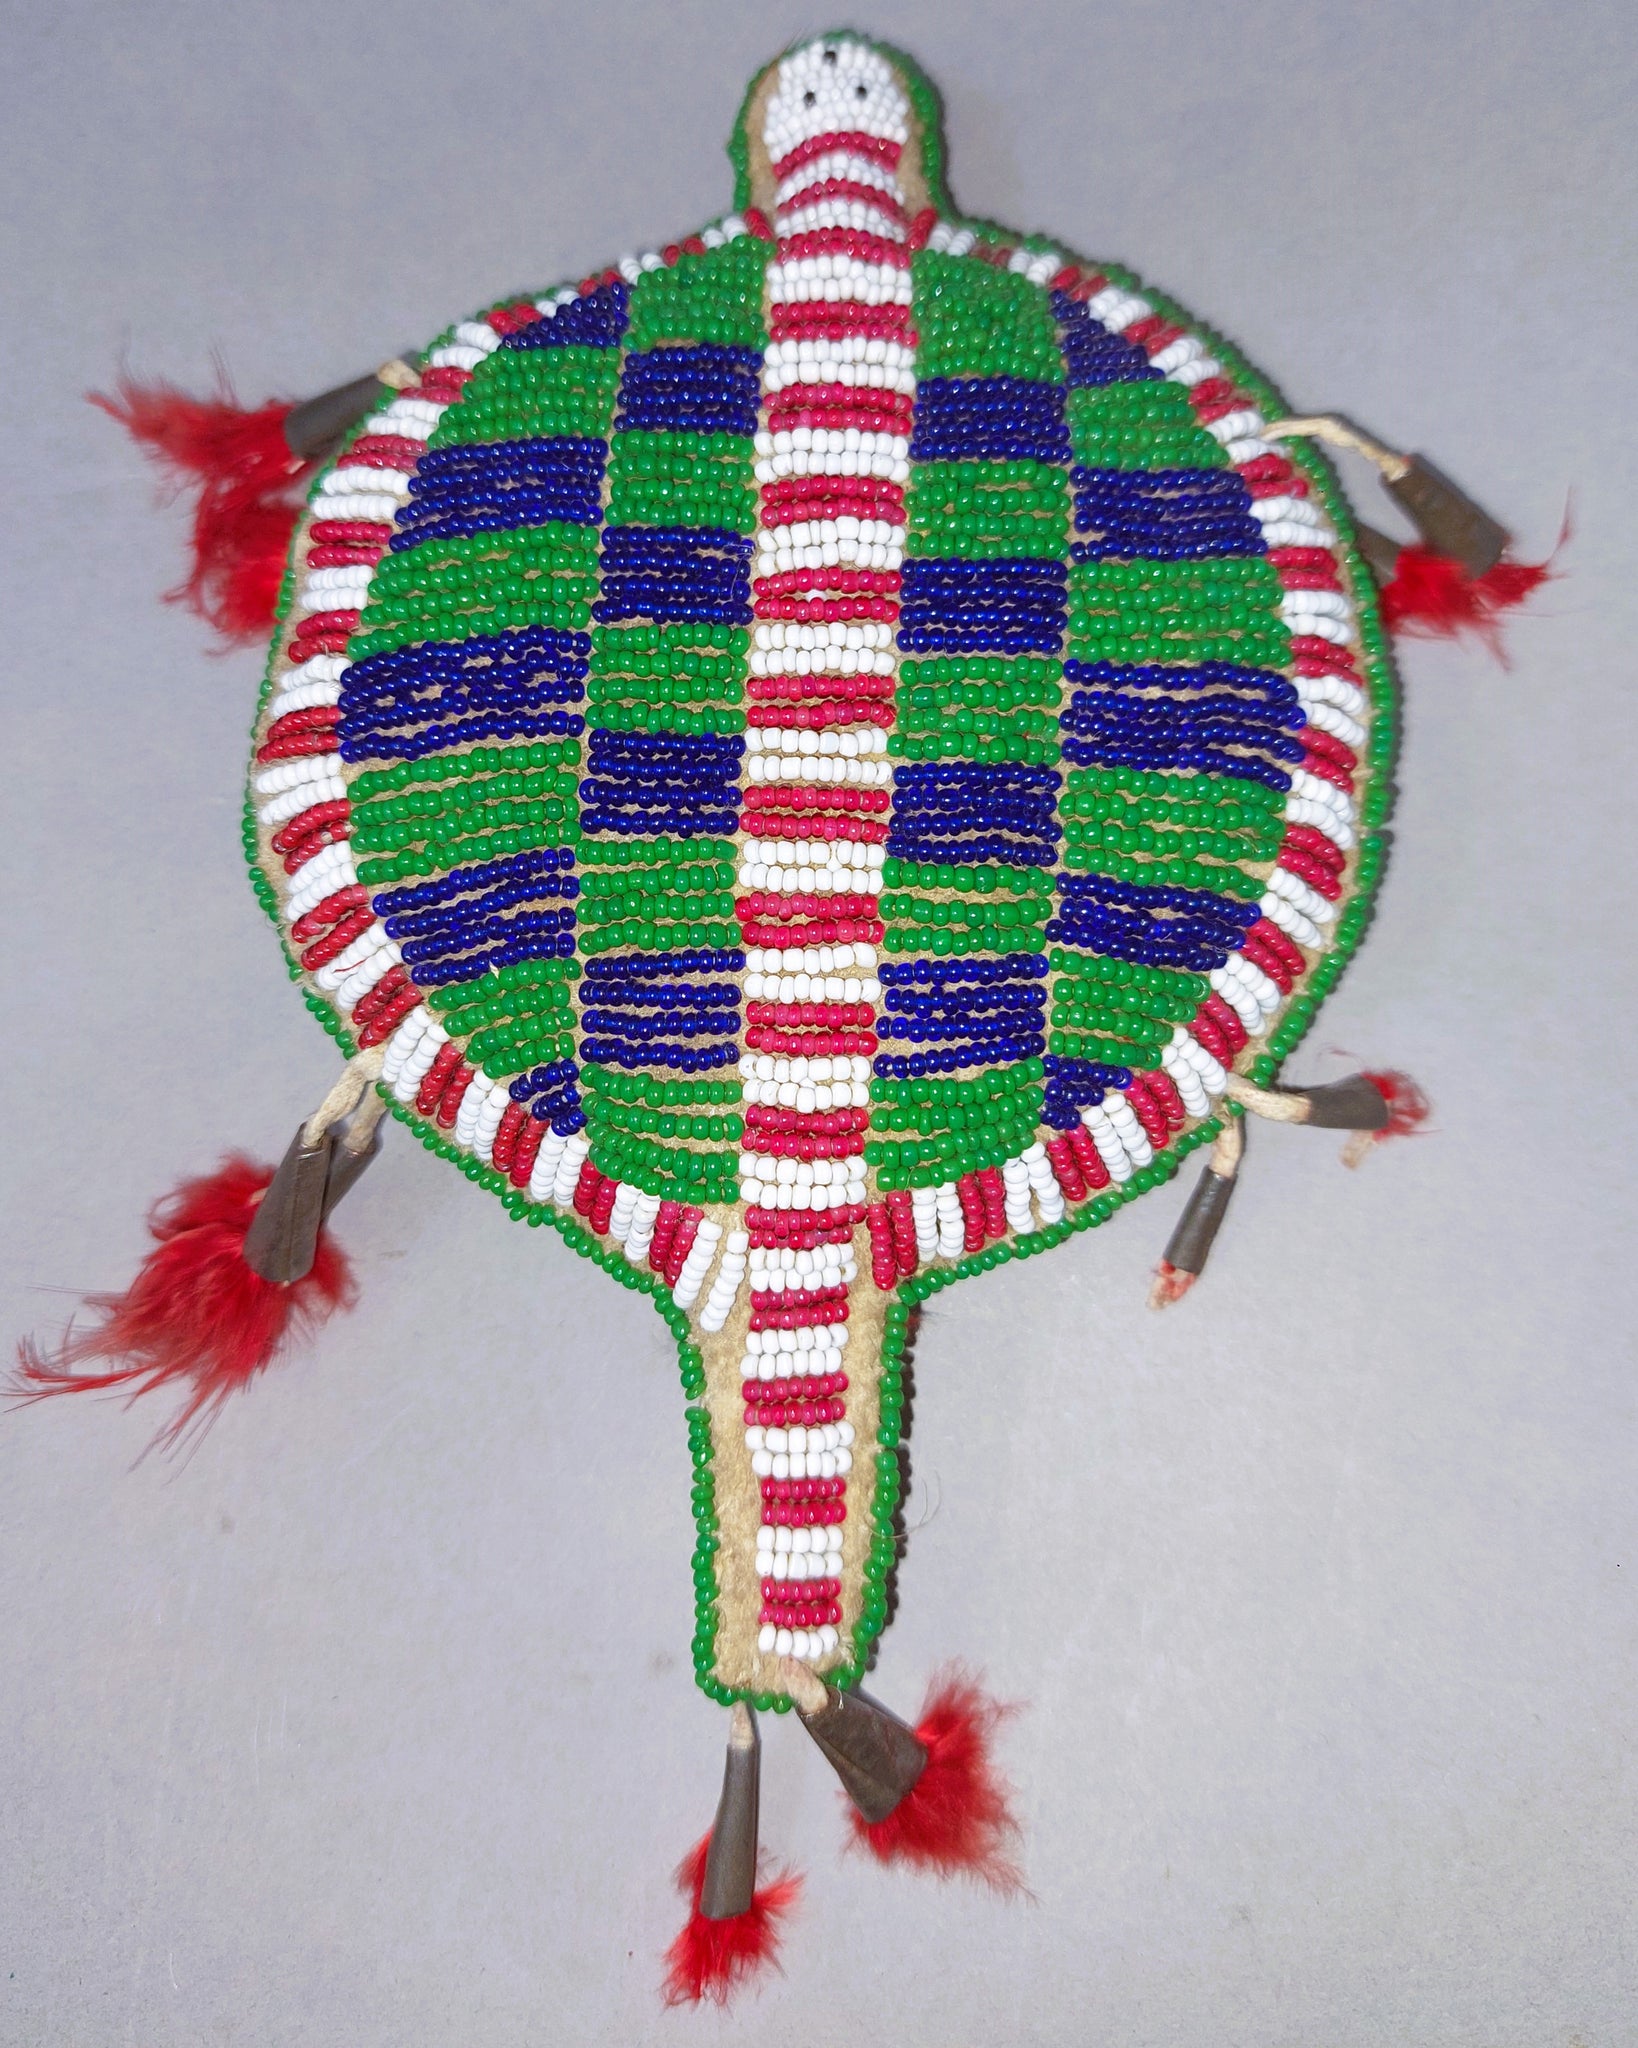 Sioux Umbilical Fetish with Red, White, Blue, Green Beads